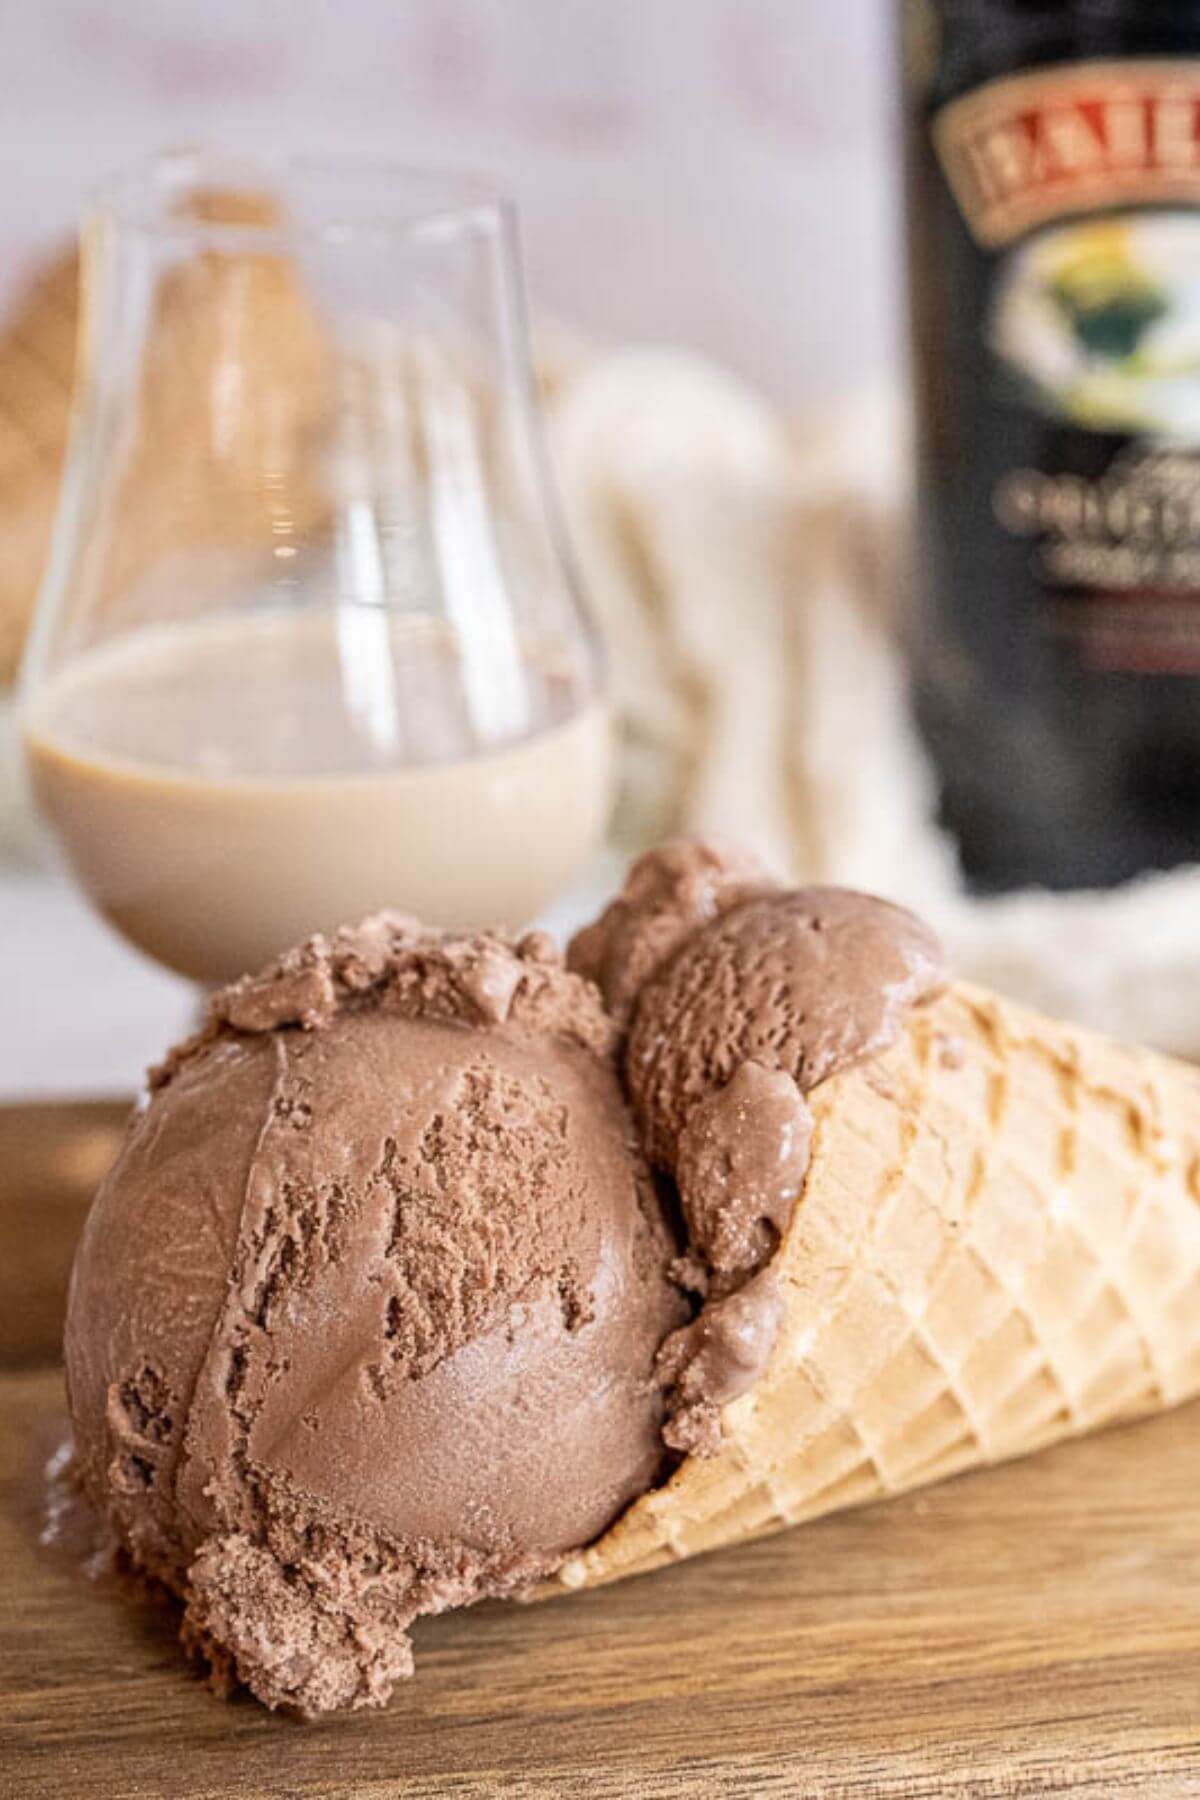 An ice cream cone is on its side in front of Baileys bottle and glass.